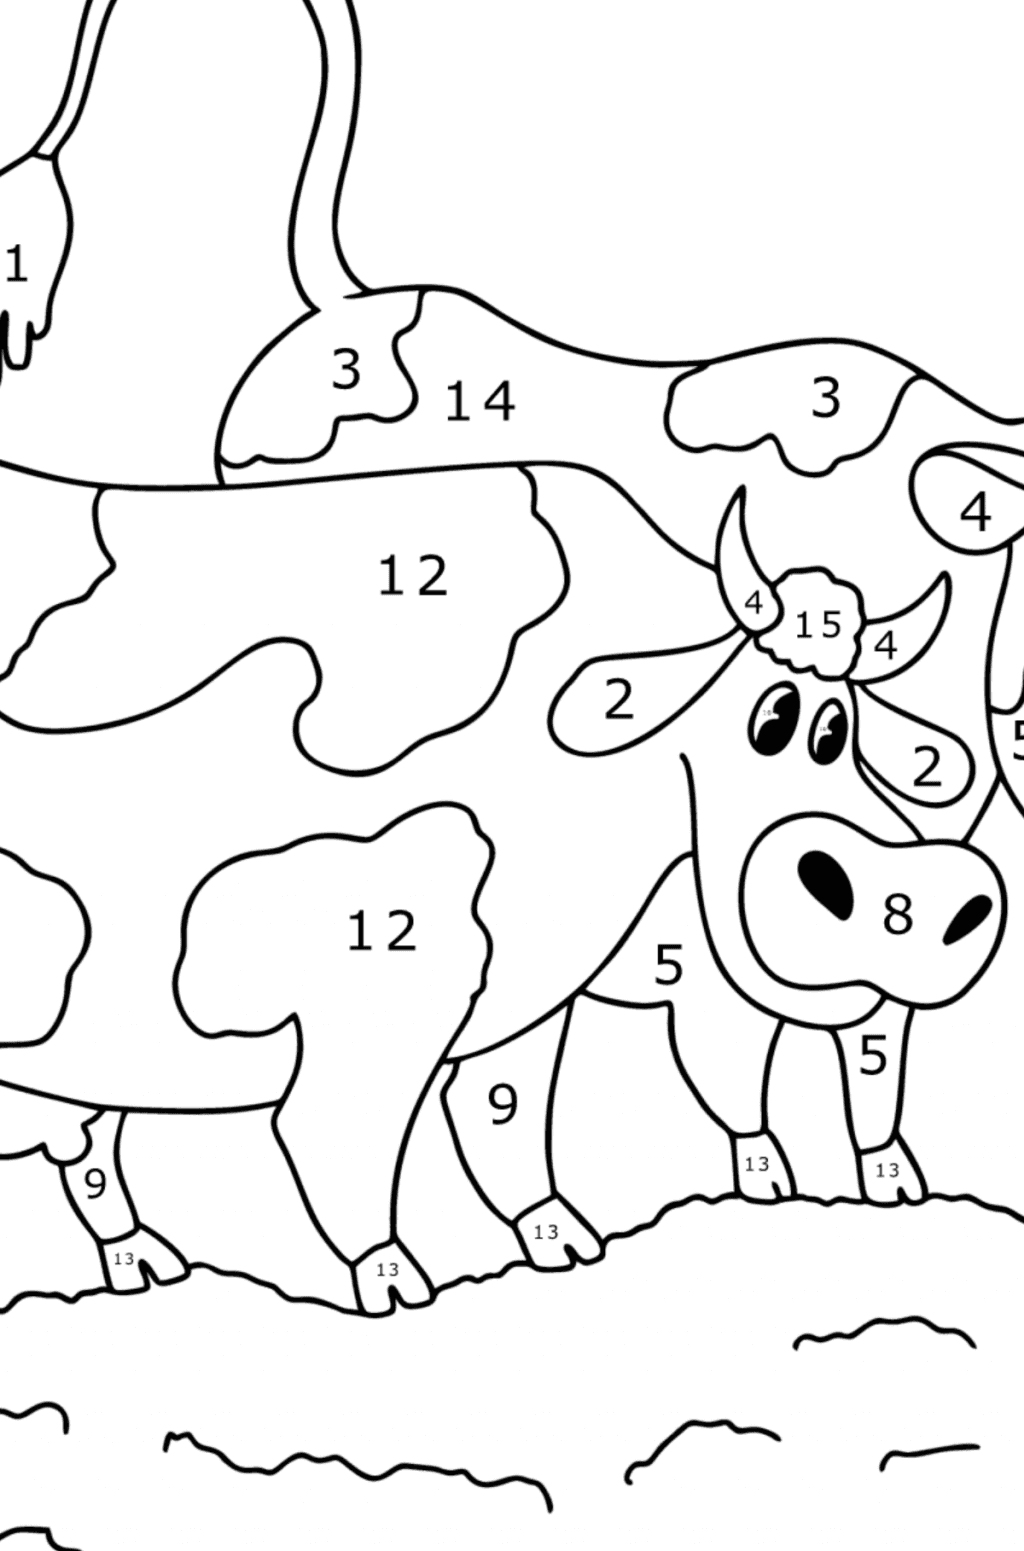 Two cows in the meadow Coloring page ♥ Online and Print for Free!